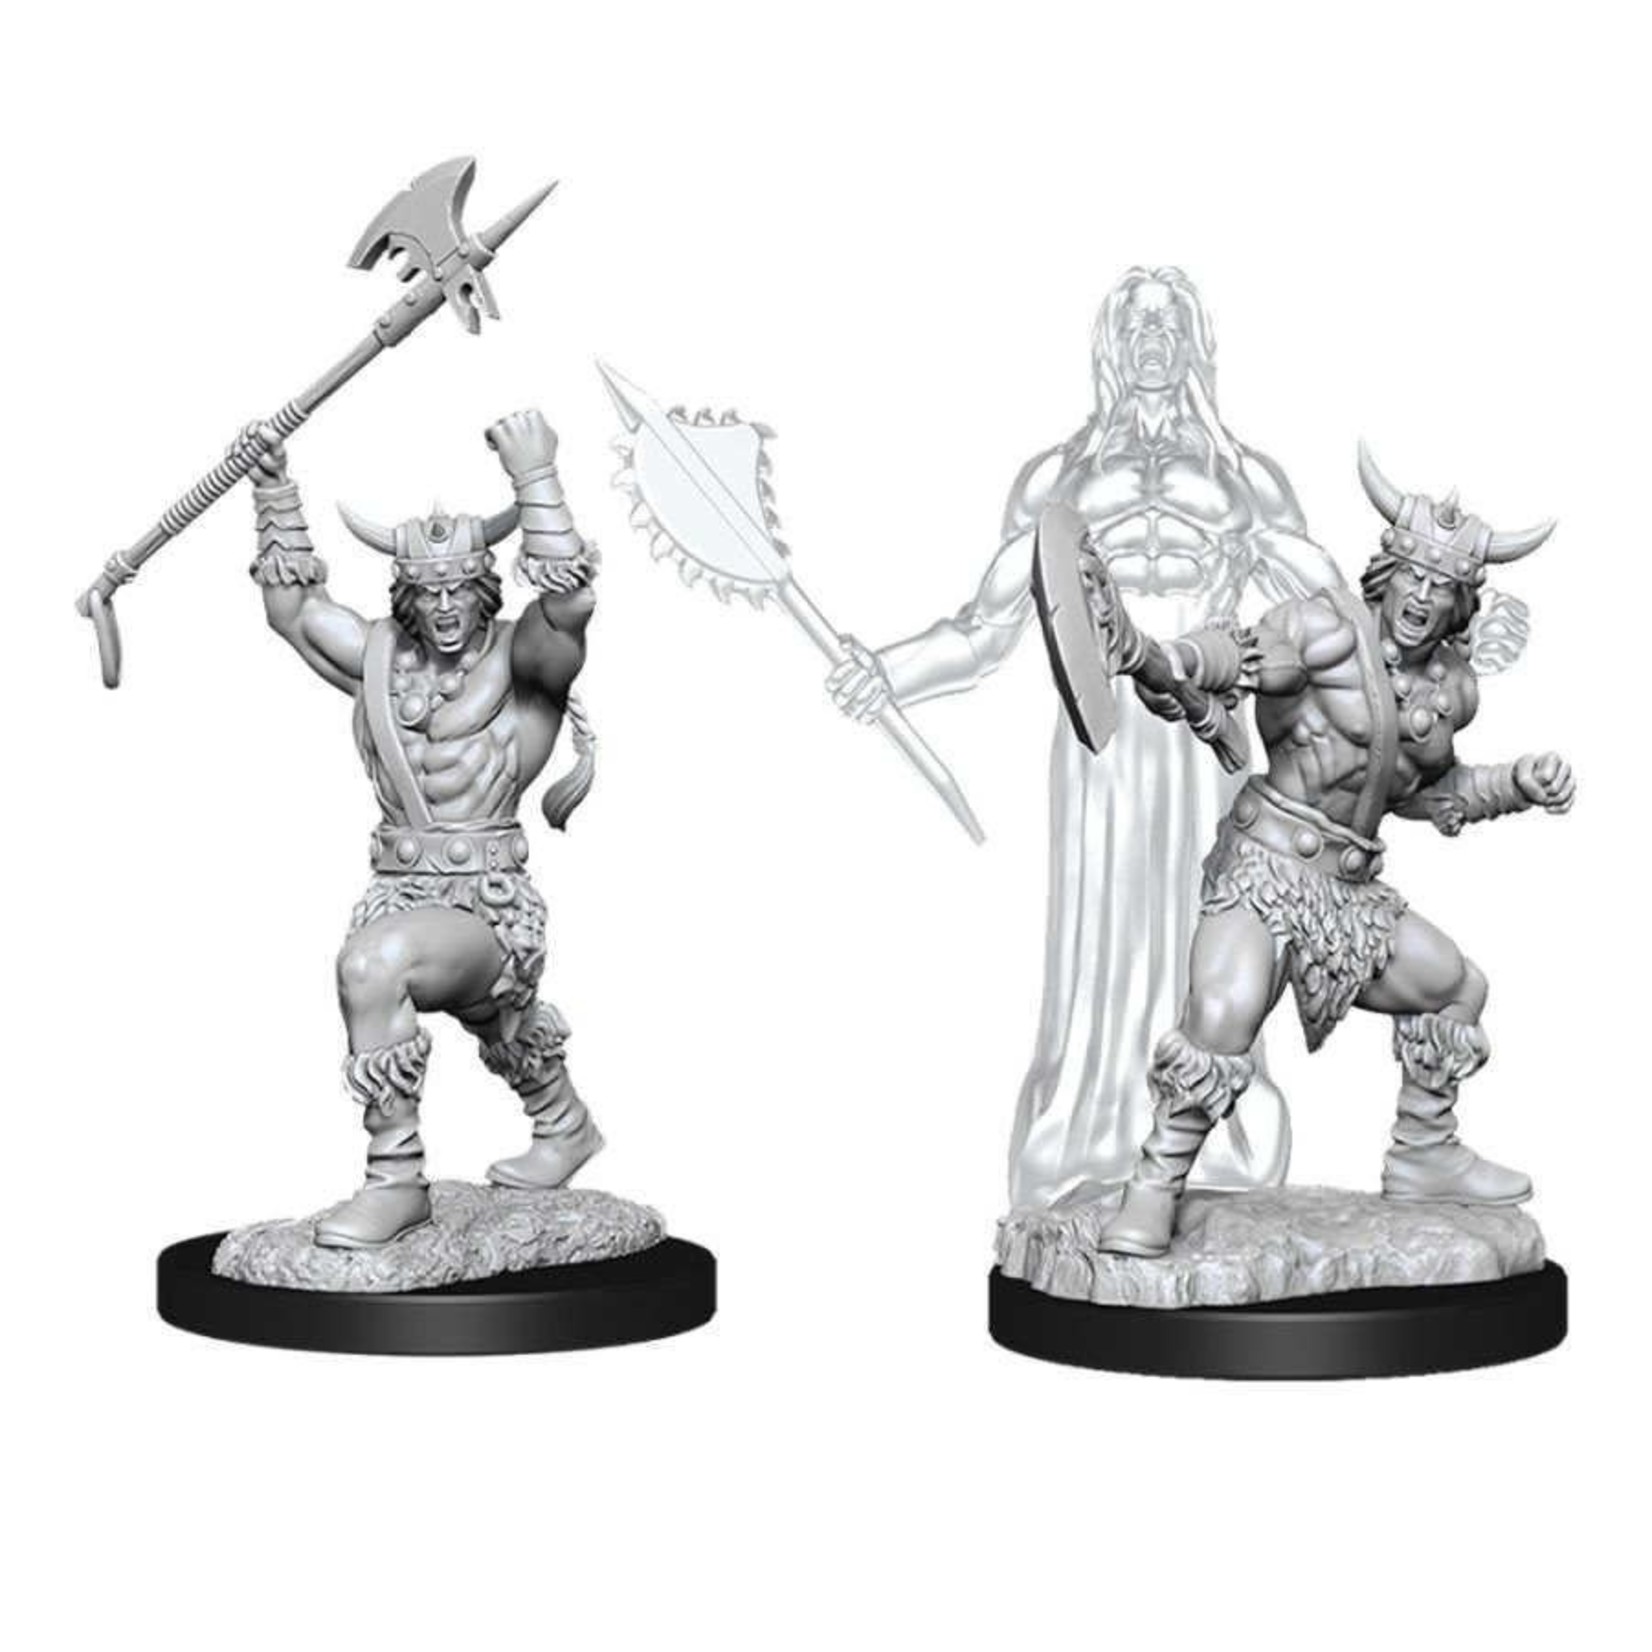 WizKids Dungeons and Dragons Nolzur's Marvelous Minis Male Human Barbarian